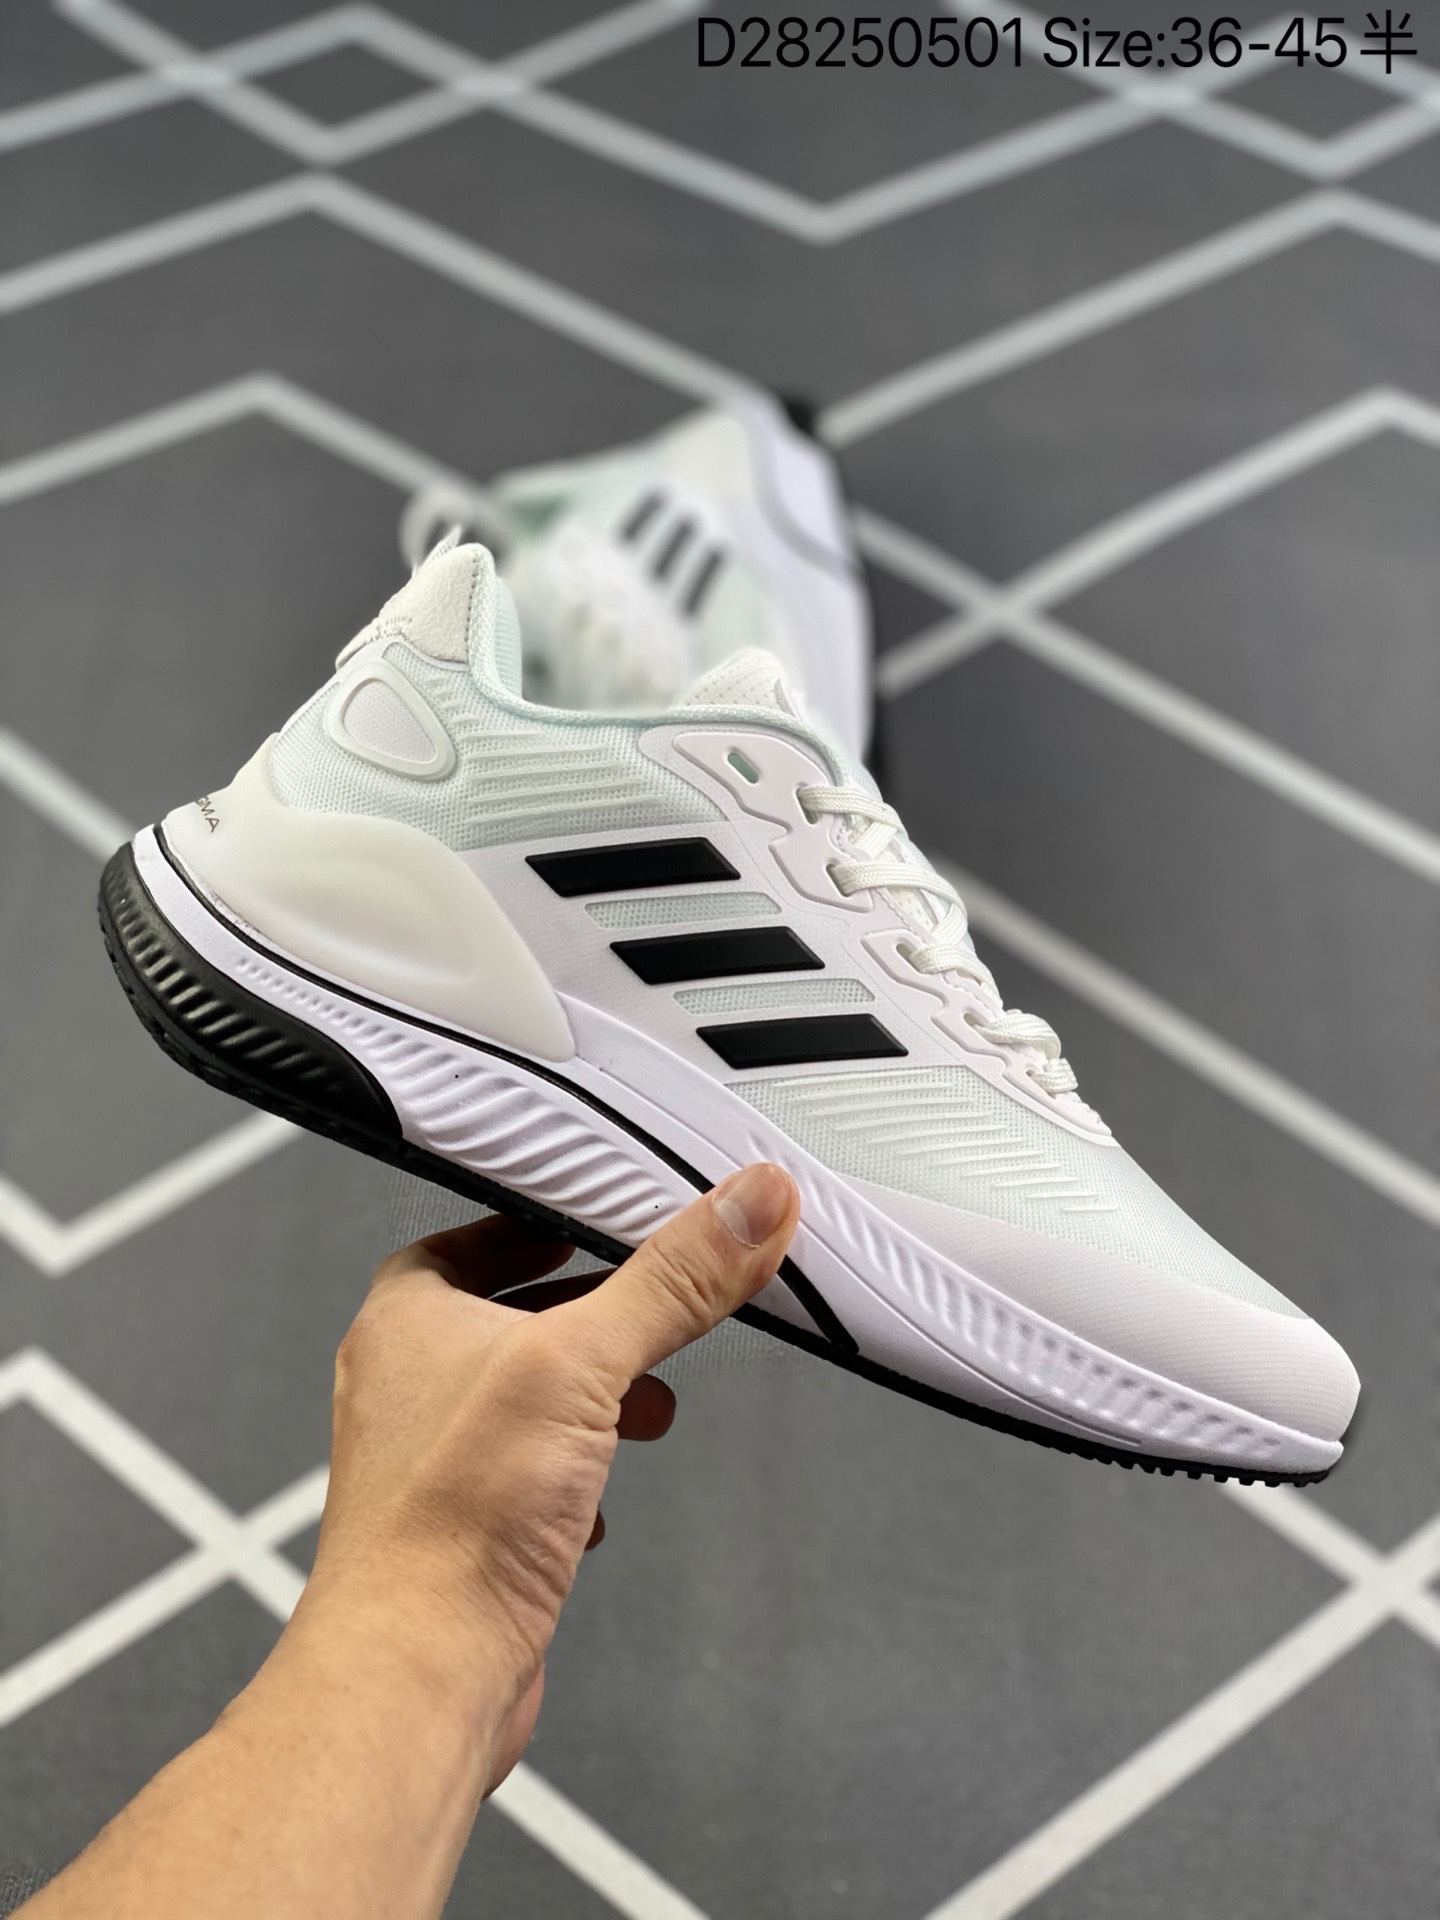 Enjuiciar metano Fracaso AdidasAlphamagma 100% Original flagship store AdidasShoes shoes for men  women sale sneakers authentic original on sale style running shoes Low Cut  new arrival brand travel Cushioning couple Comfortable train Breathable |  Lazada PH